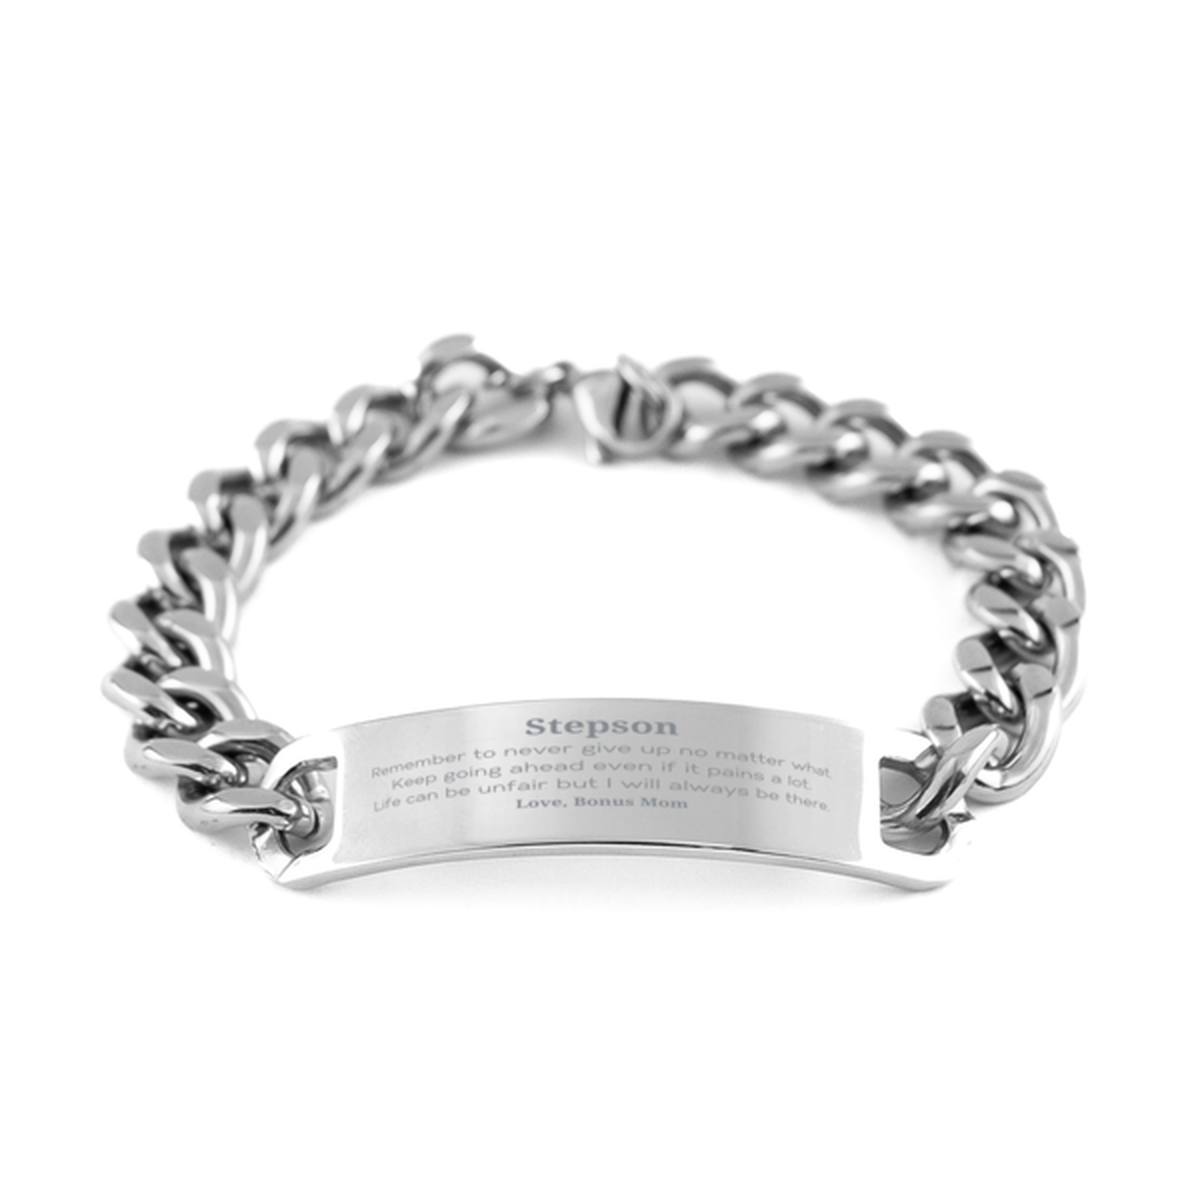 Stepson Motivational Gifts from Bonus Mom, Remember to never give up no matter what, Inspirational Birthday Cuban Chain Stainless Steel Bracelet for Stepson